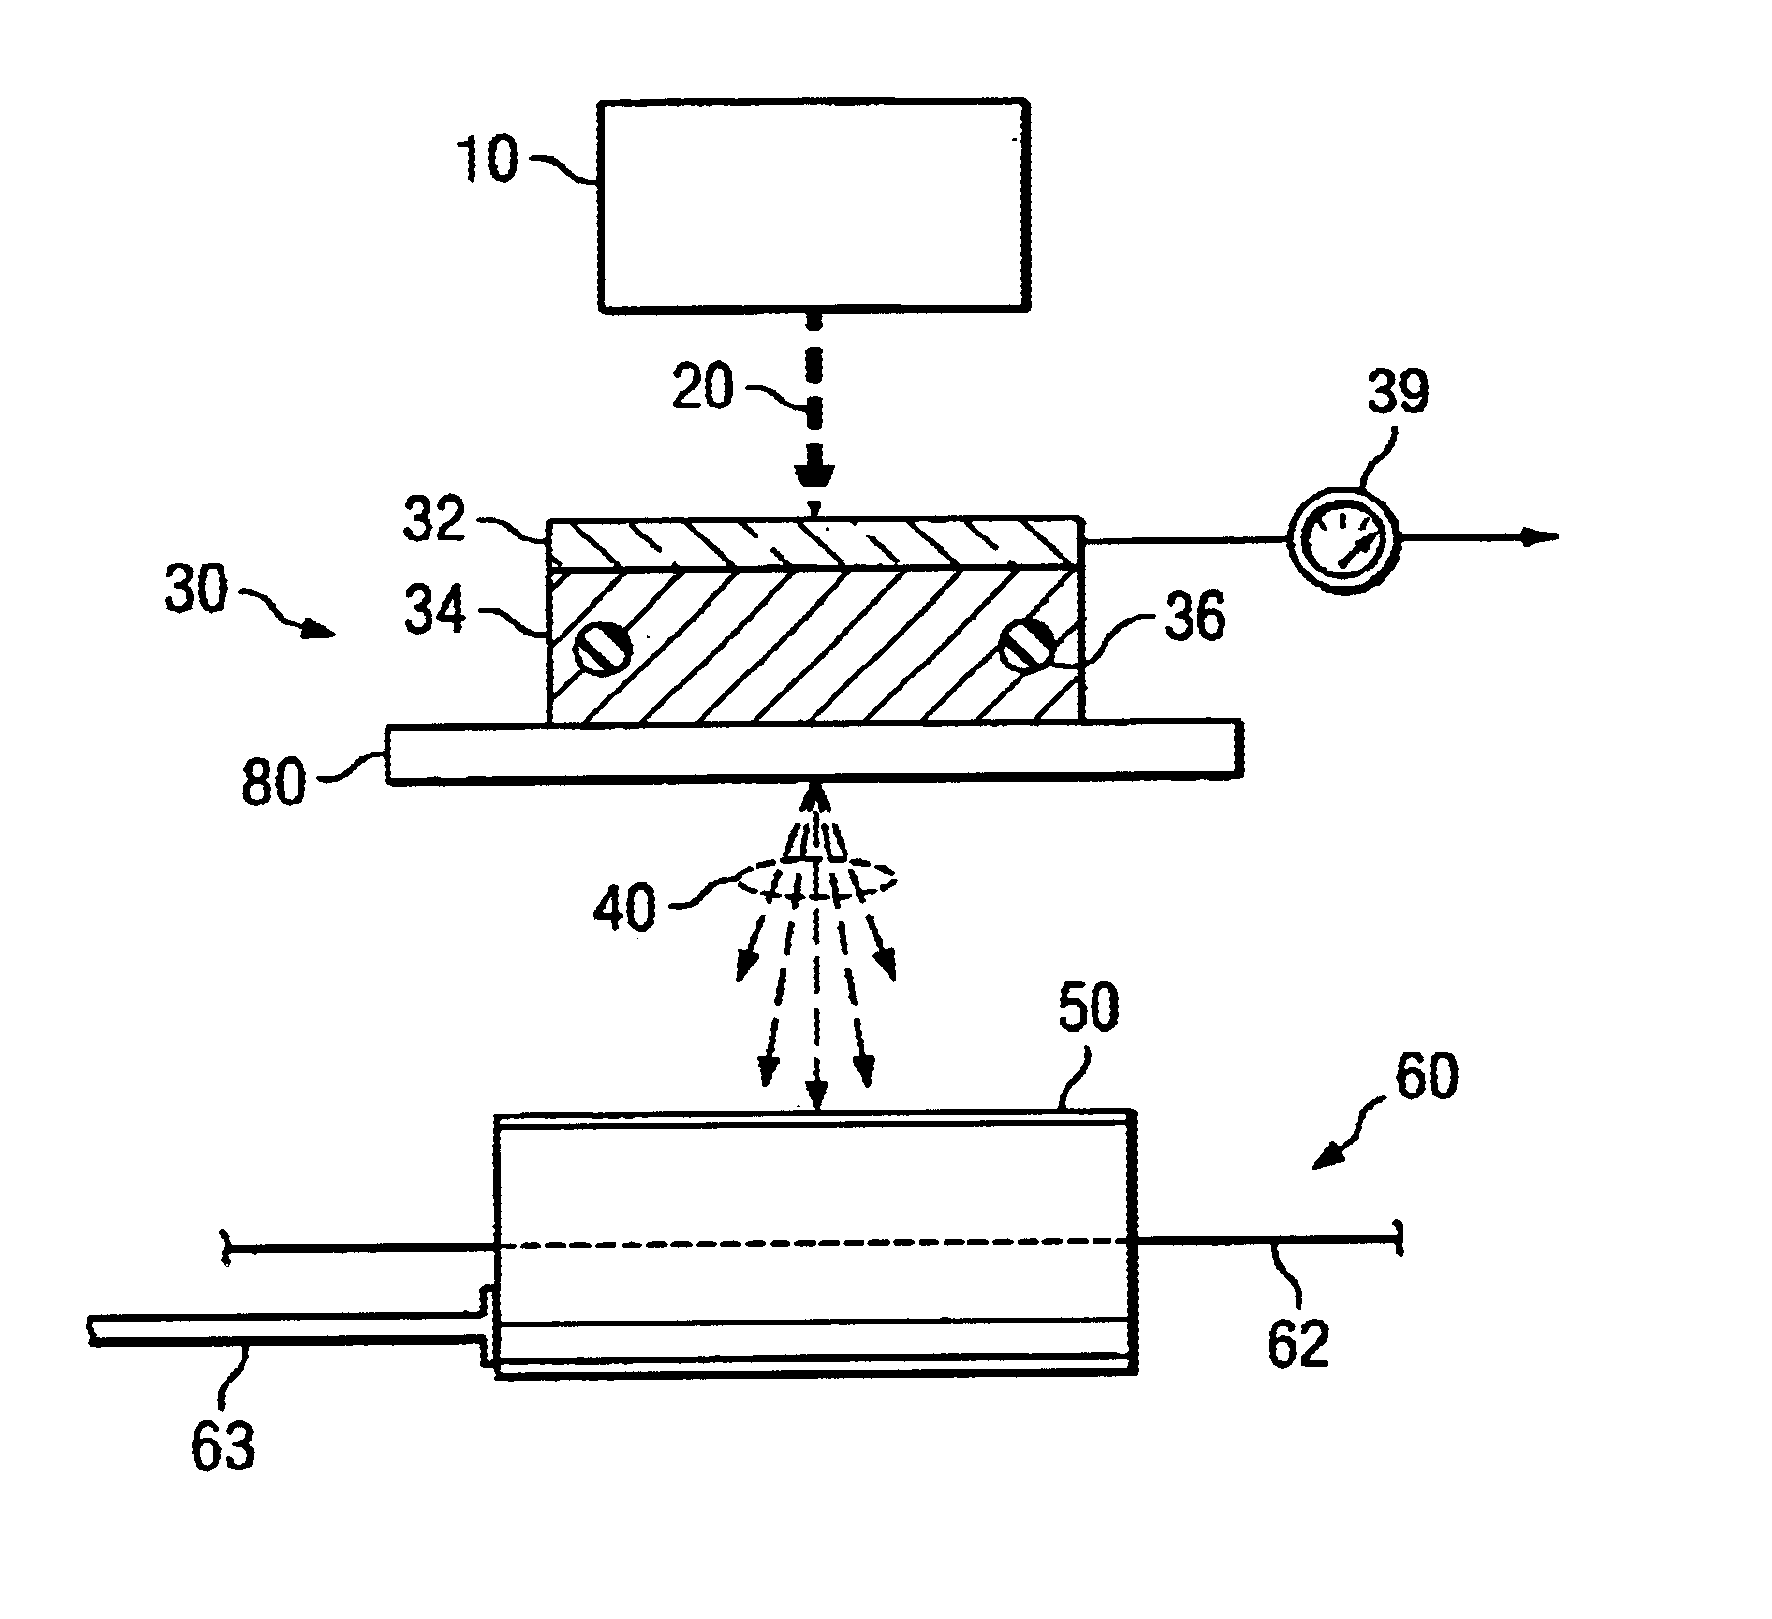 Method and apparatus for producing radioactive materials for medical treatment using x-rays produced by an electron accelerator